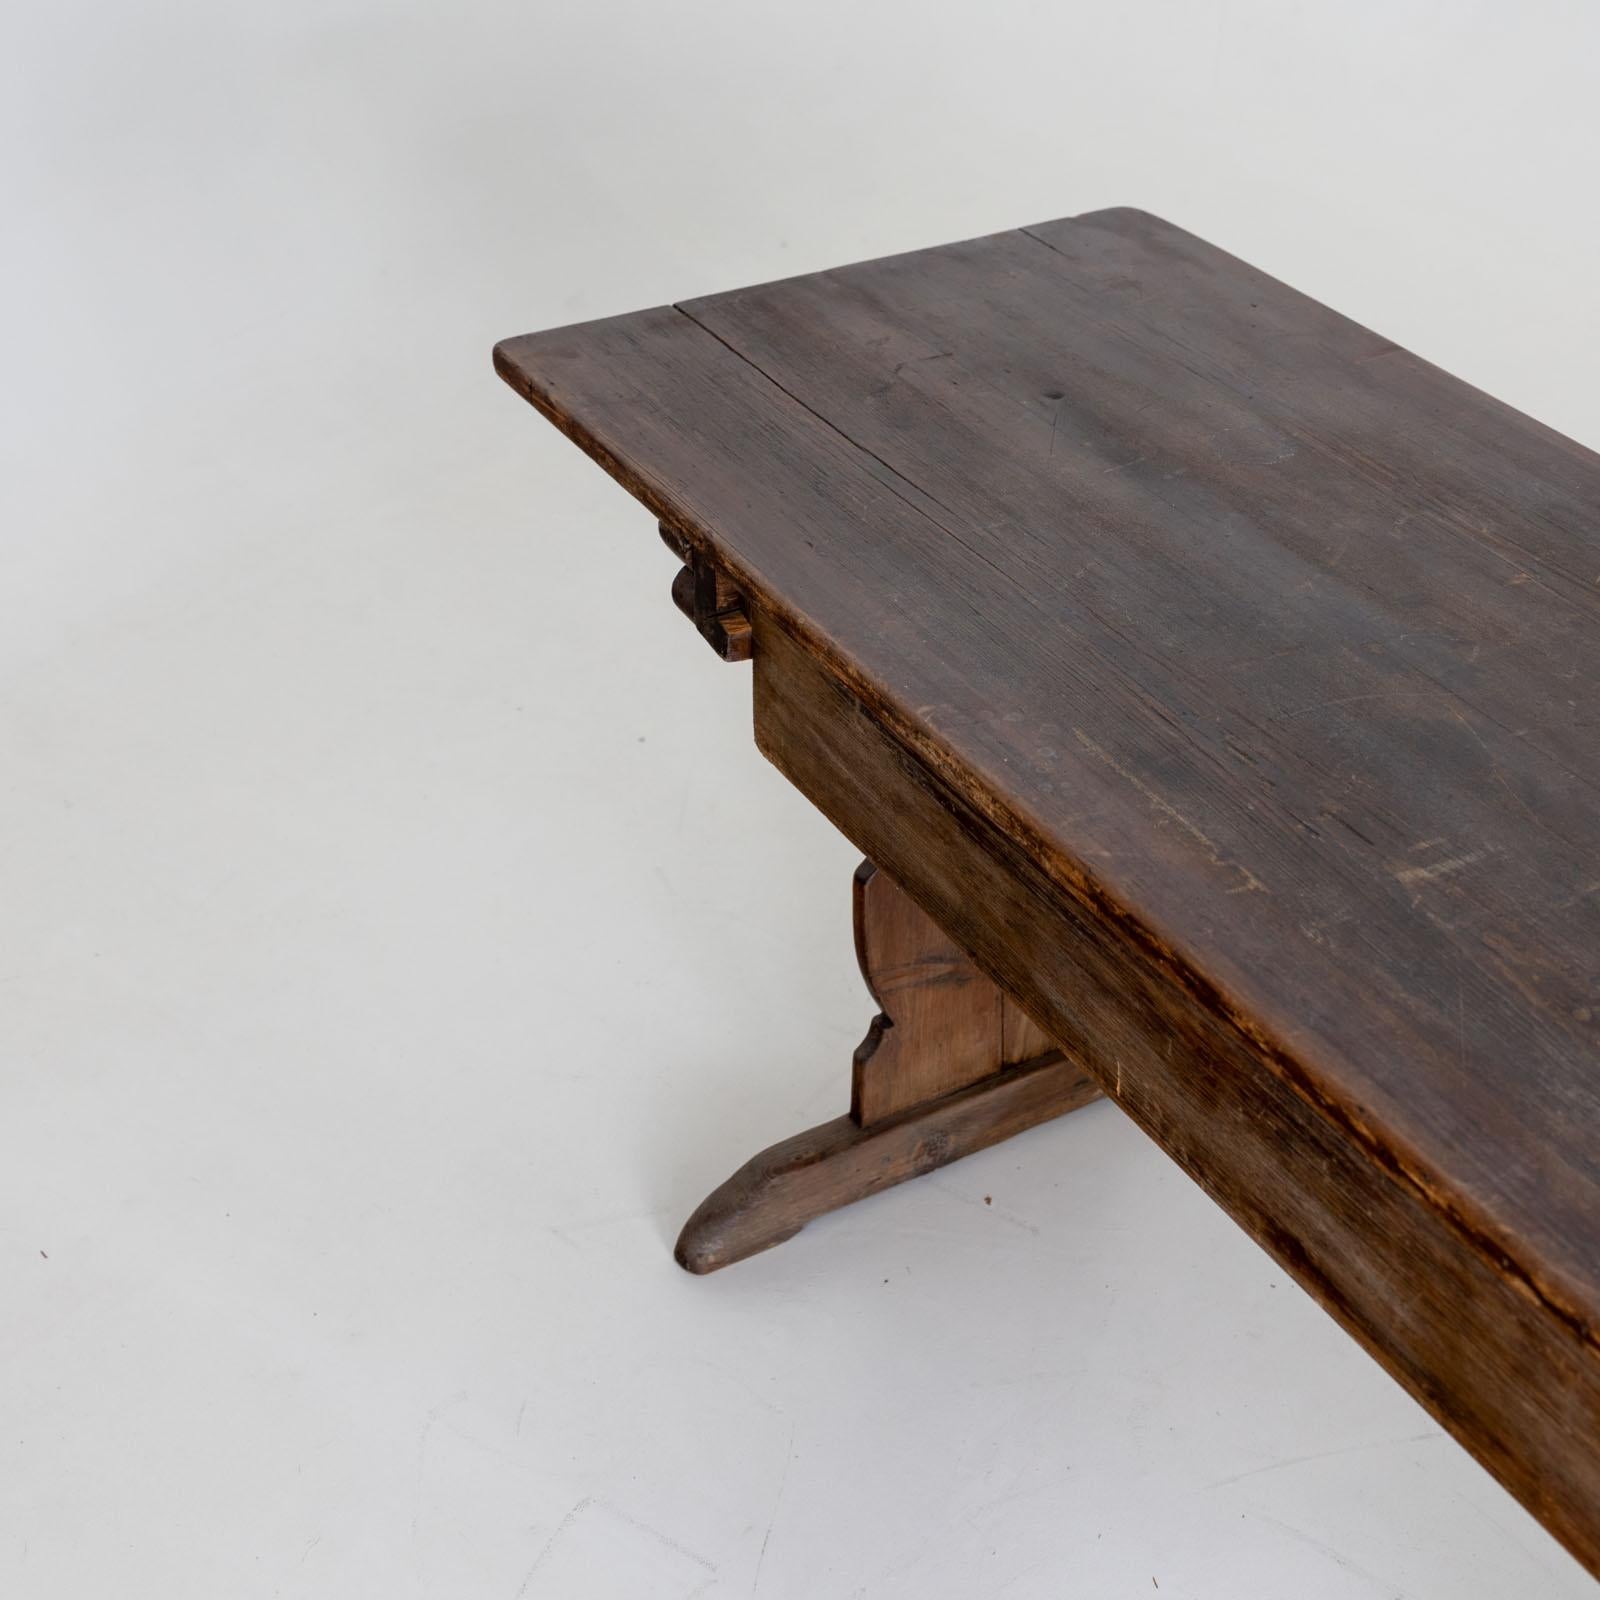 Large dining table with cut-out sides as legs and a wide board as strutting. The rectangular table top has an authentic patina. A large drawer serves as storage space.